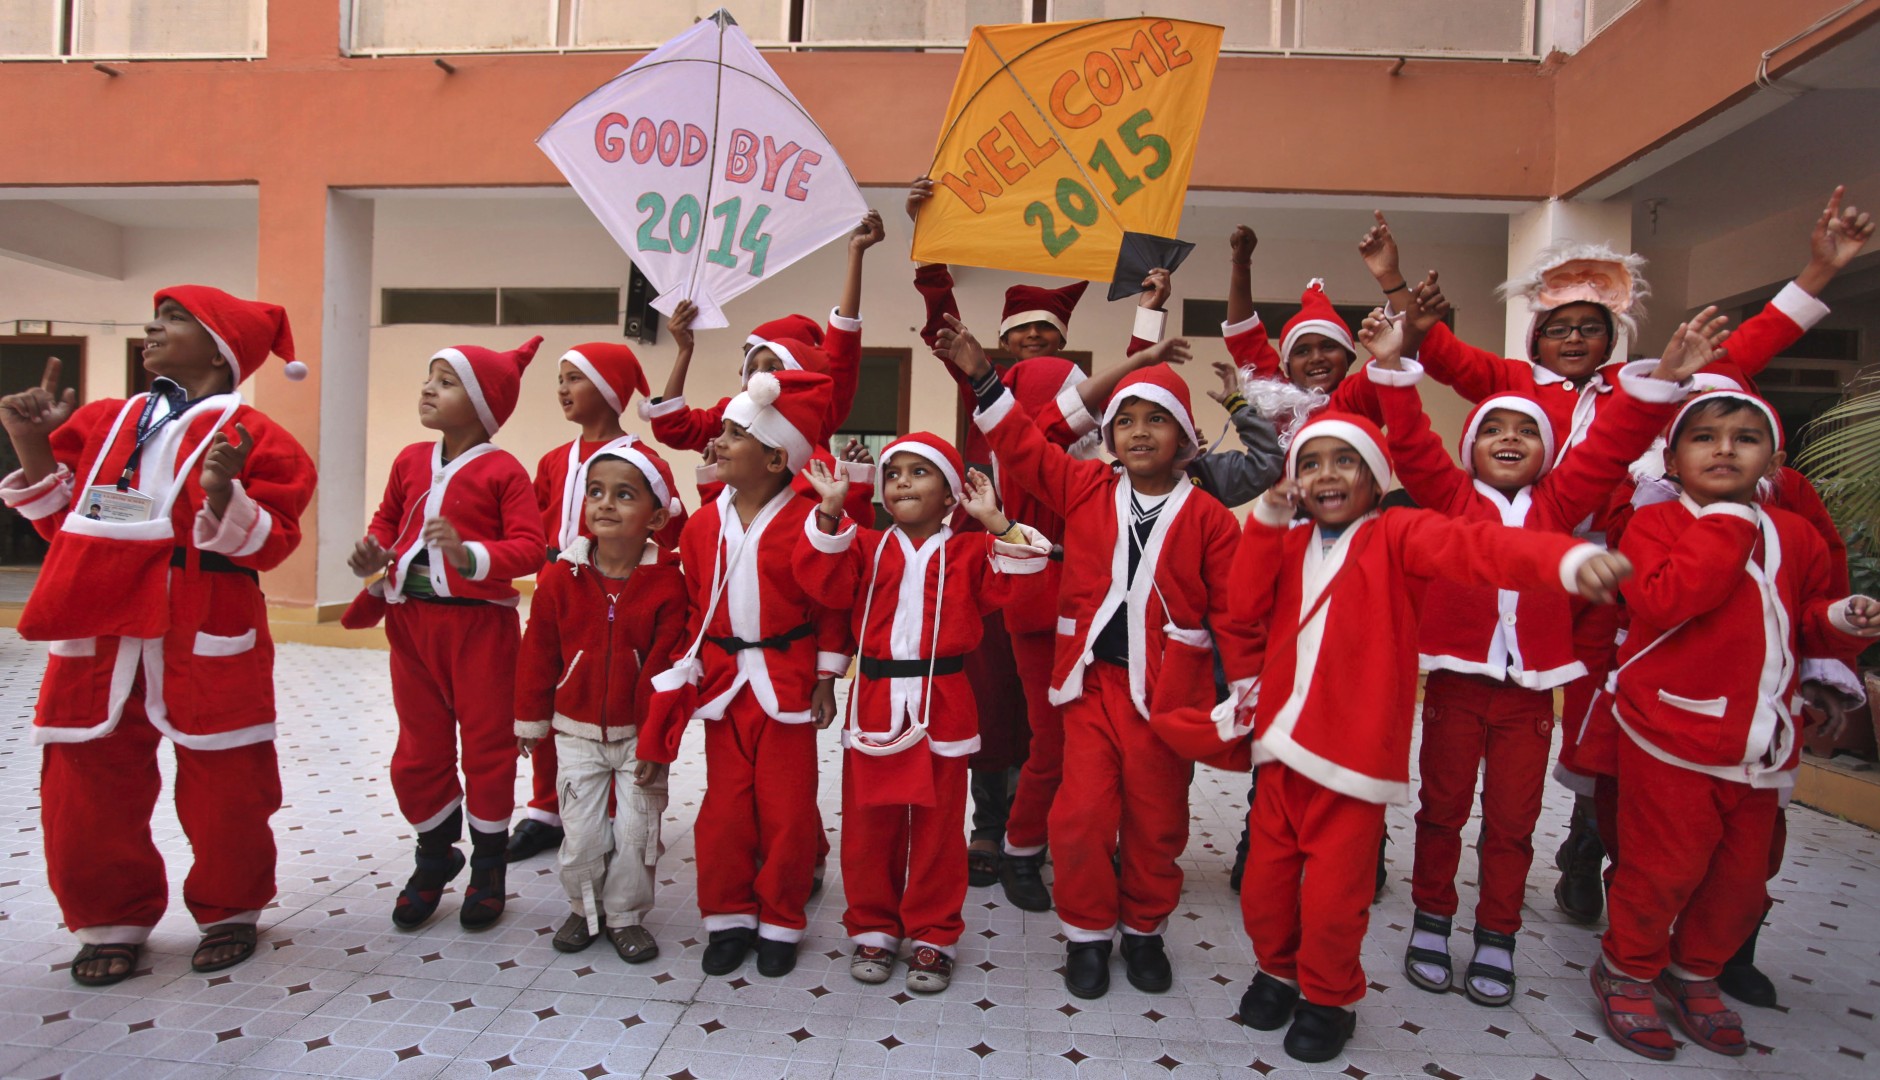 Indian students dressed as Santa Claus hold kites and dance as they participate in a function to welcome the New Year at a school in Ahmadabad, India, Wednesday, Dec. 31, 2014. (AP Photo/Ajit Solanki)